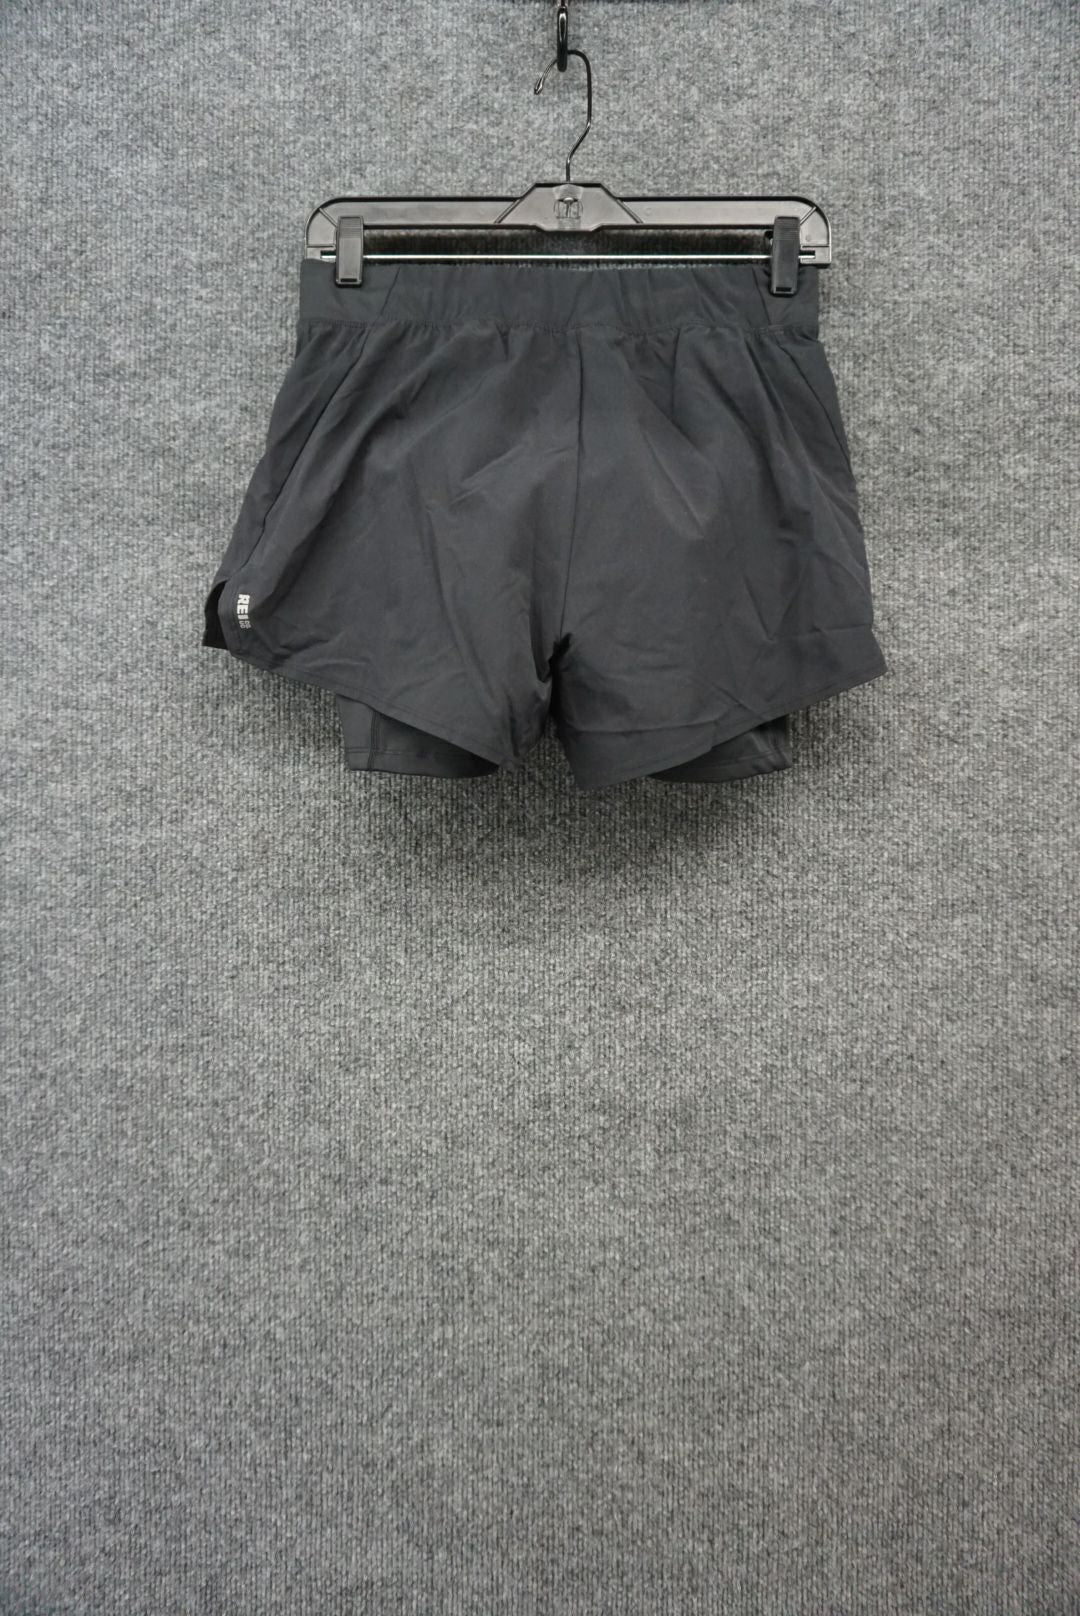 REI Size W Small Women's Active Shorts